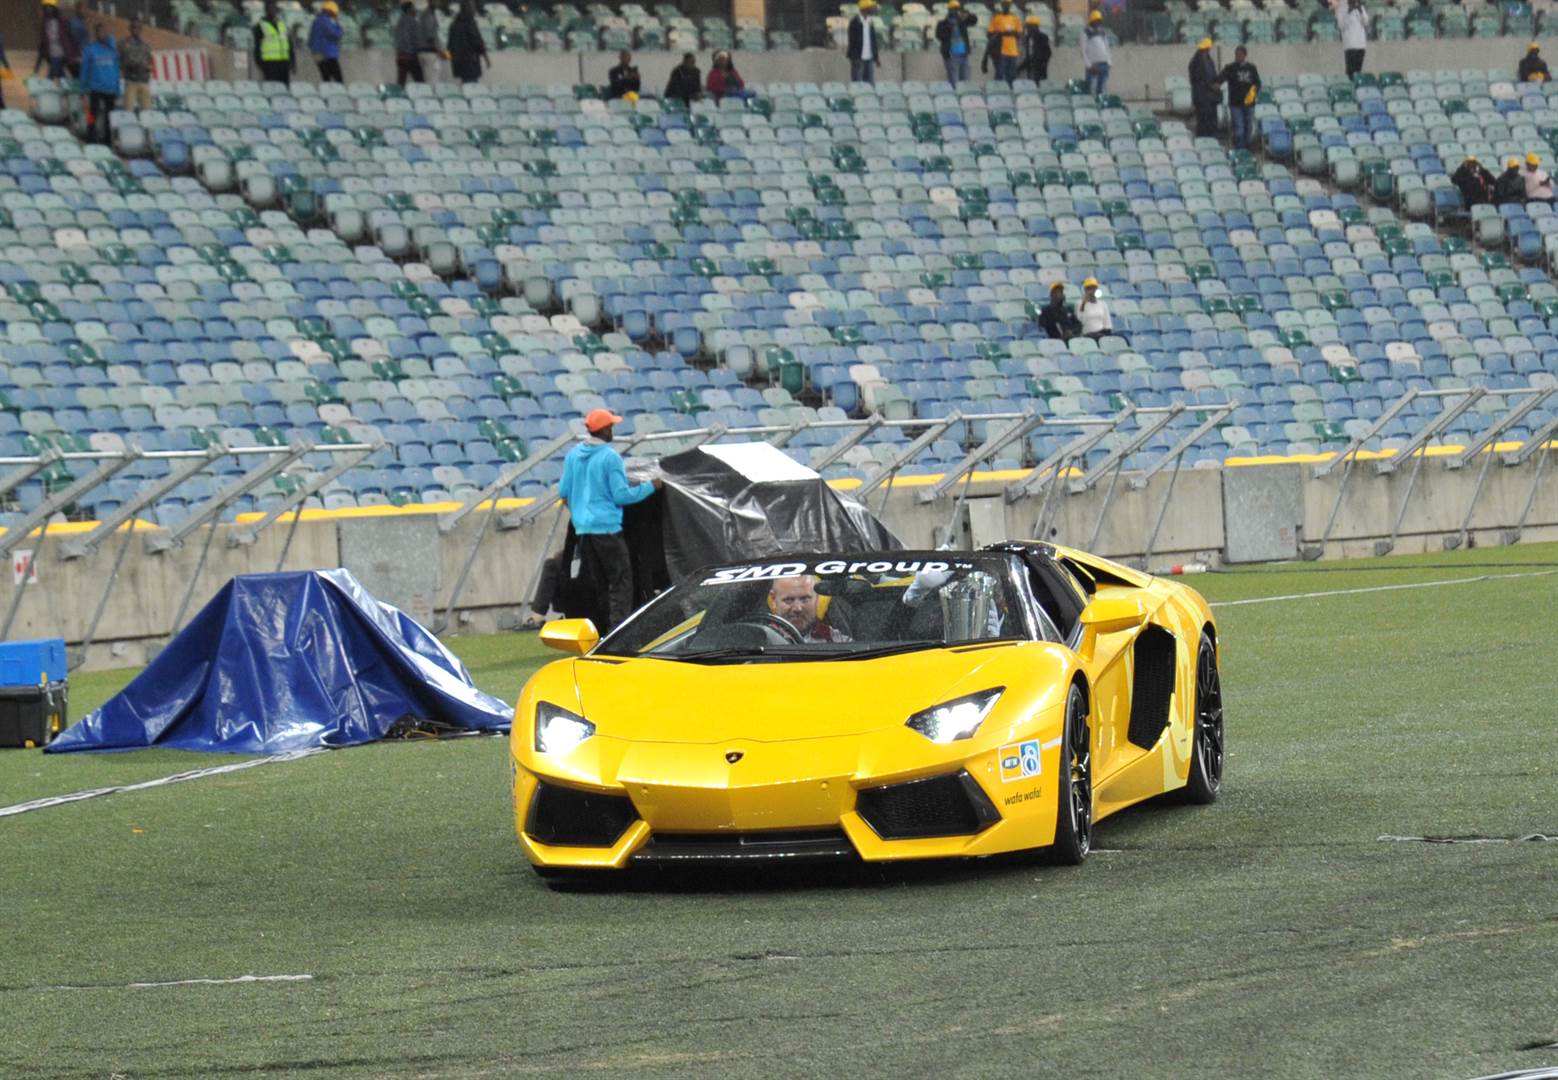 Did You See The MTN8 Trophy Arrive In A Lambo? | Soccer Laduma